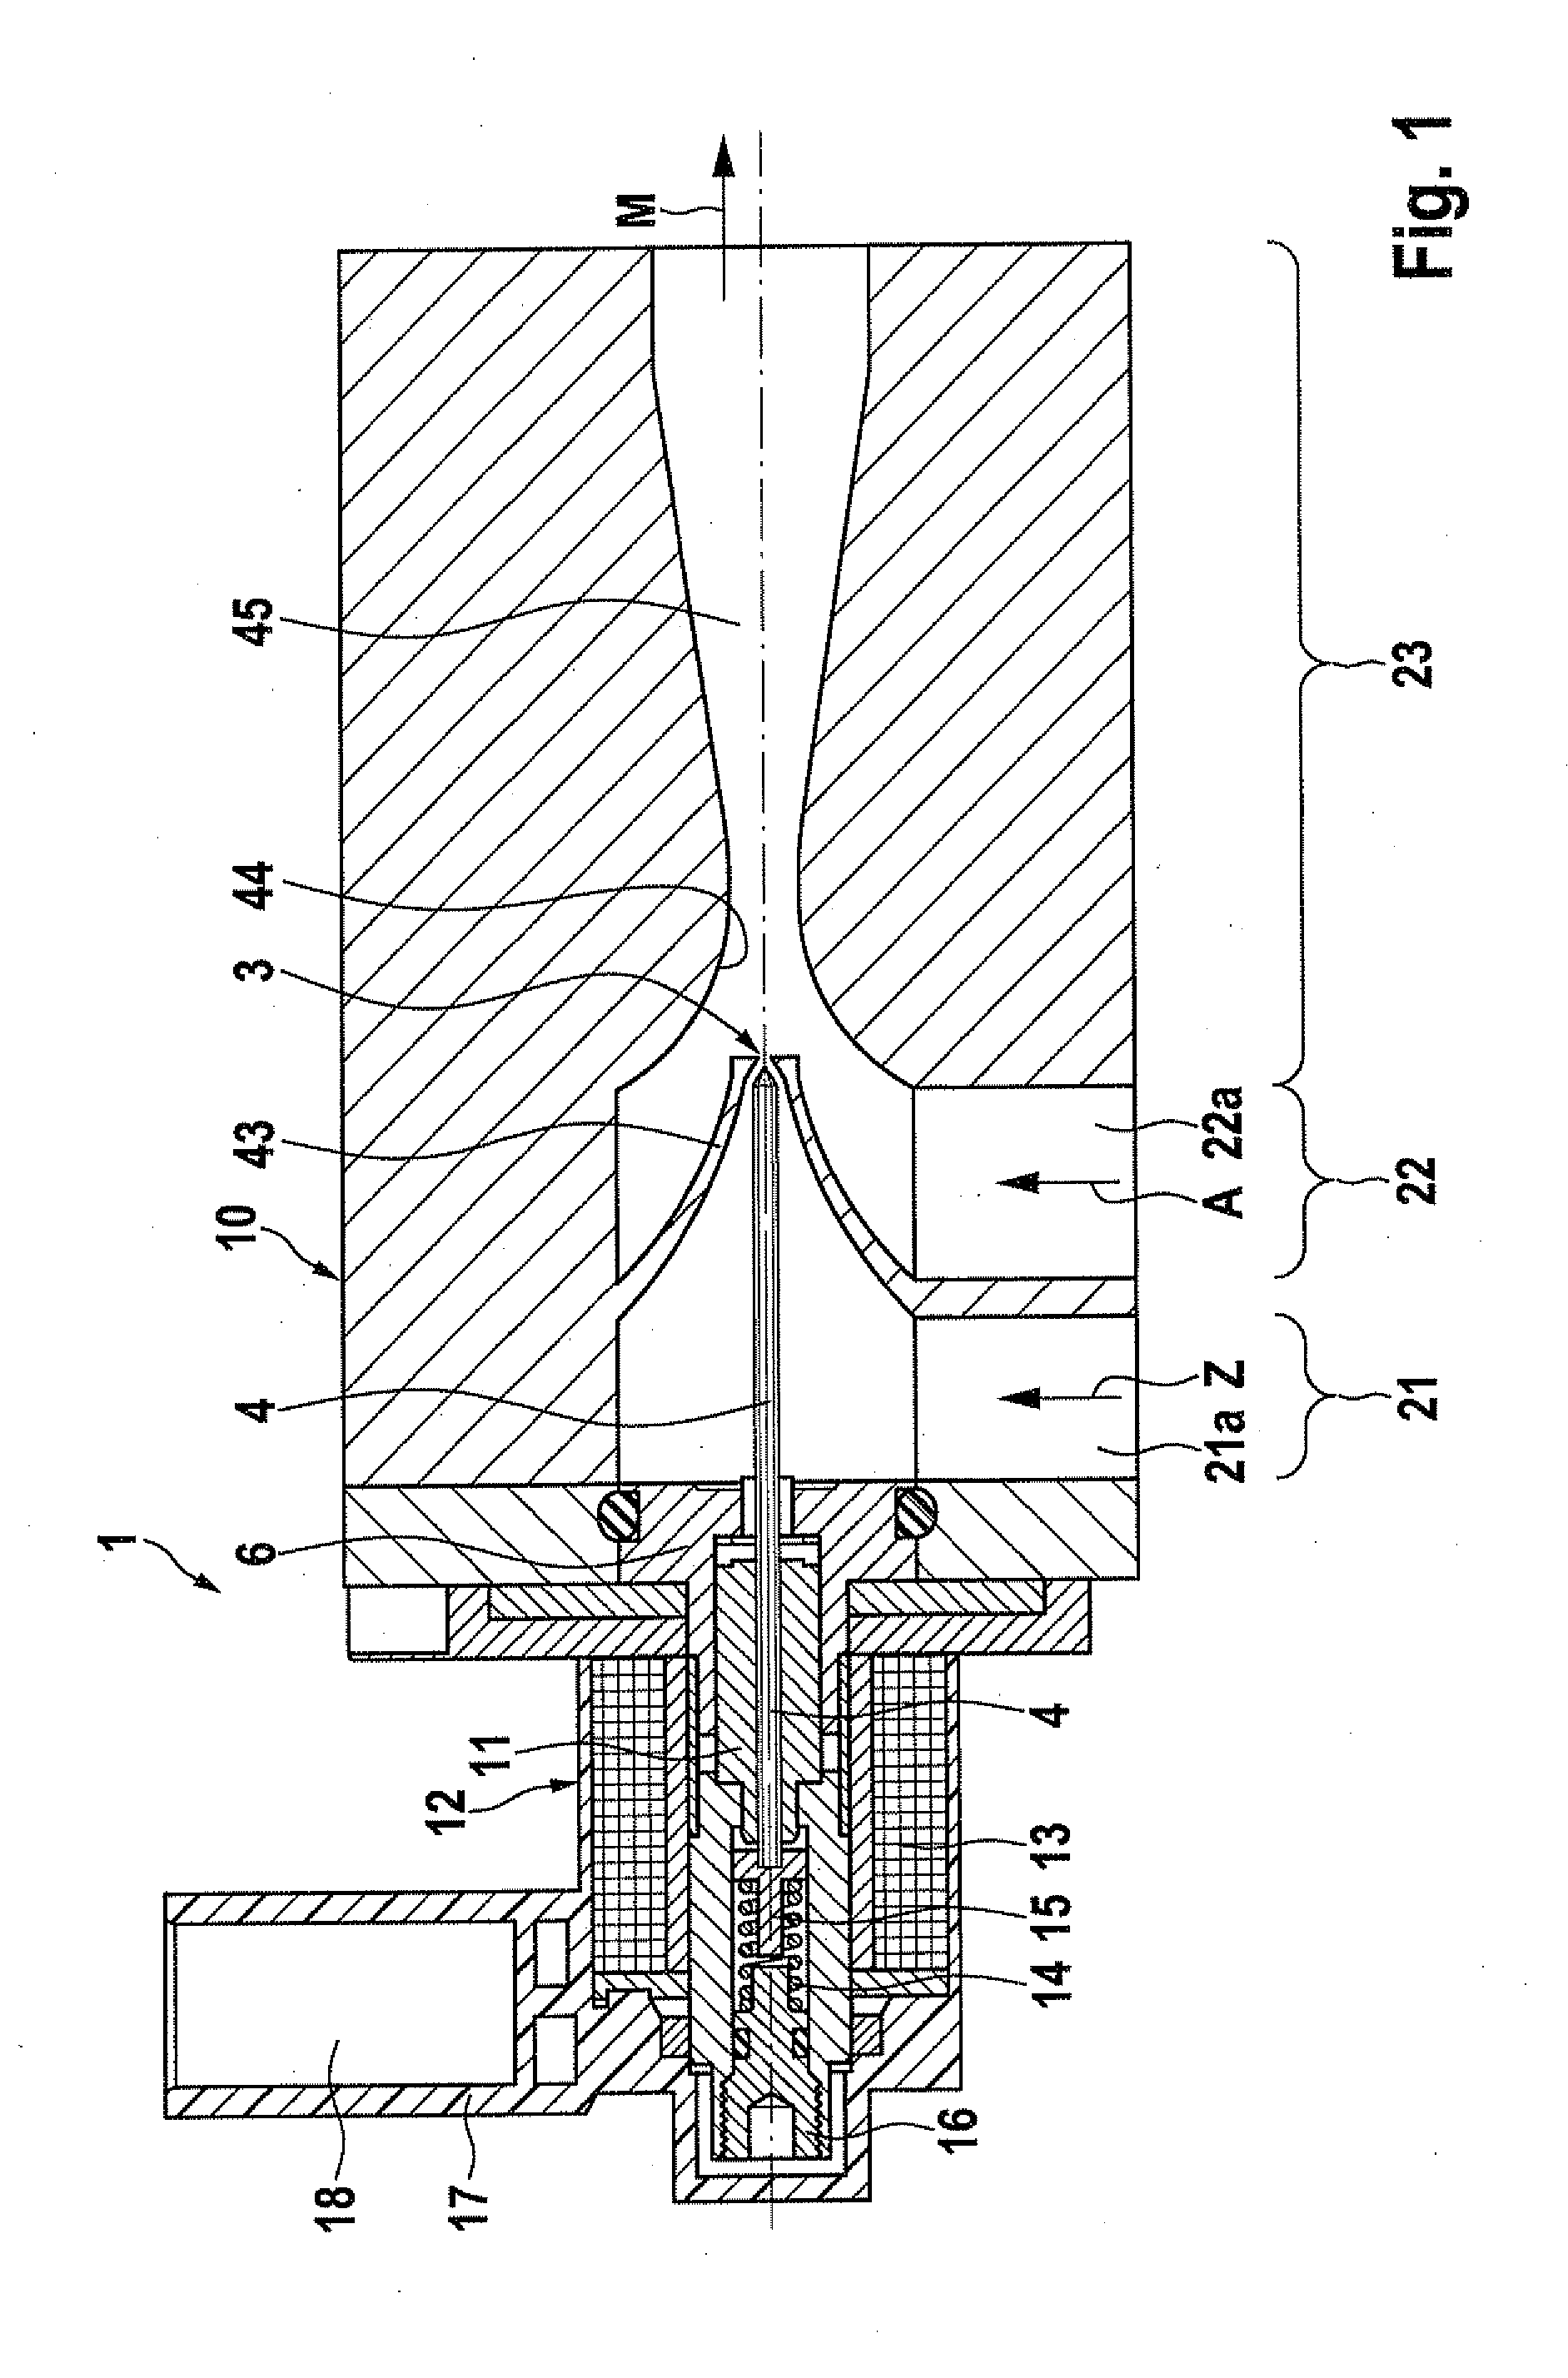 Proportional valve for control and intake of a gaseous medium